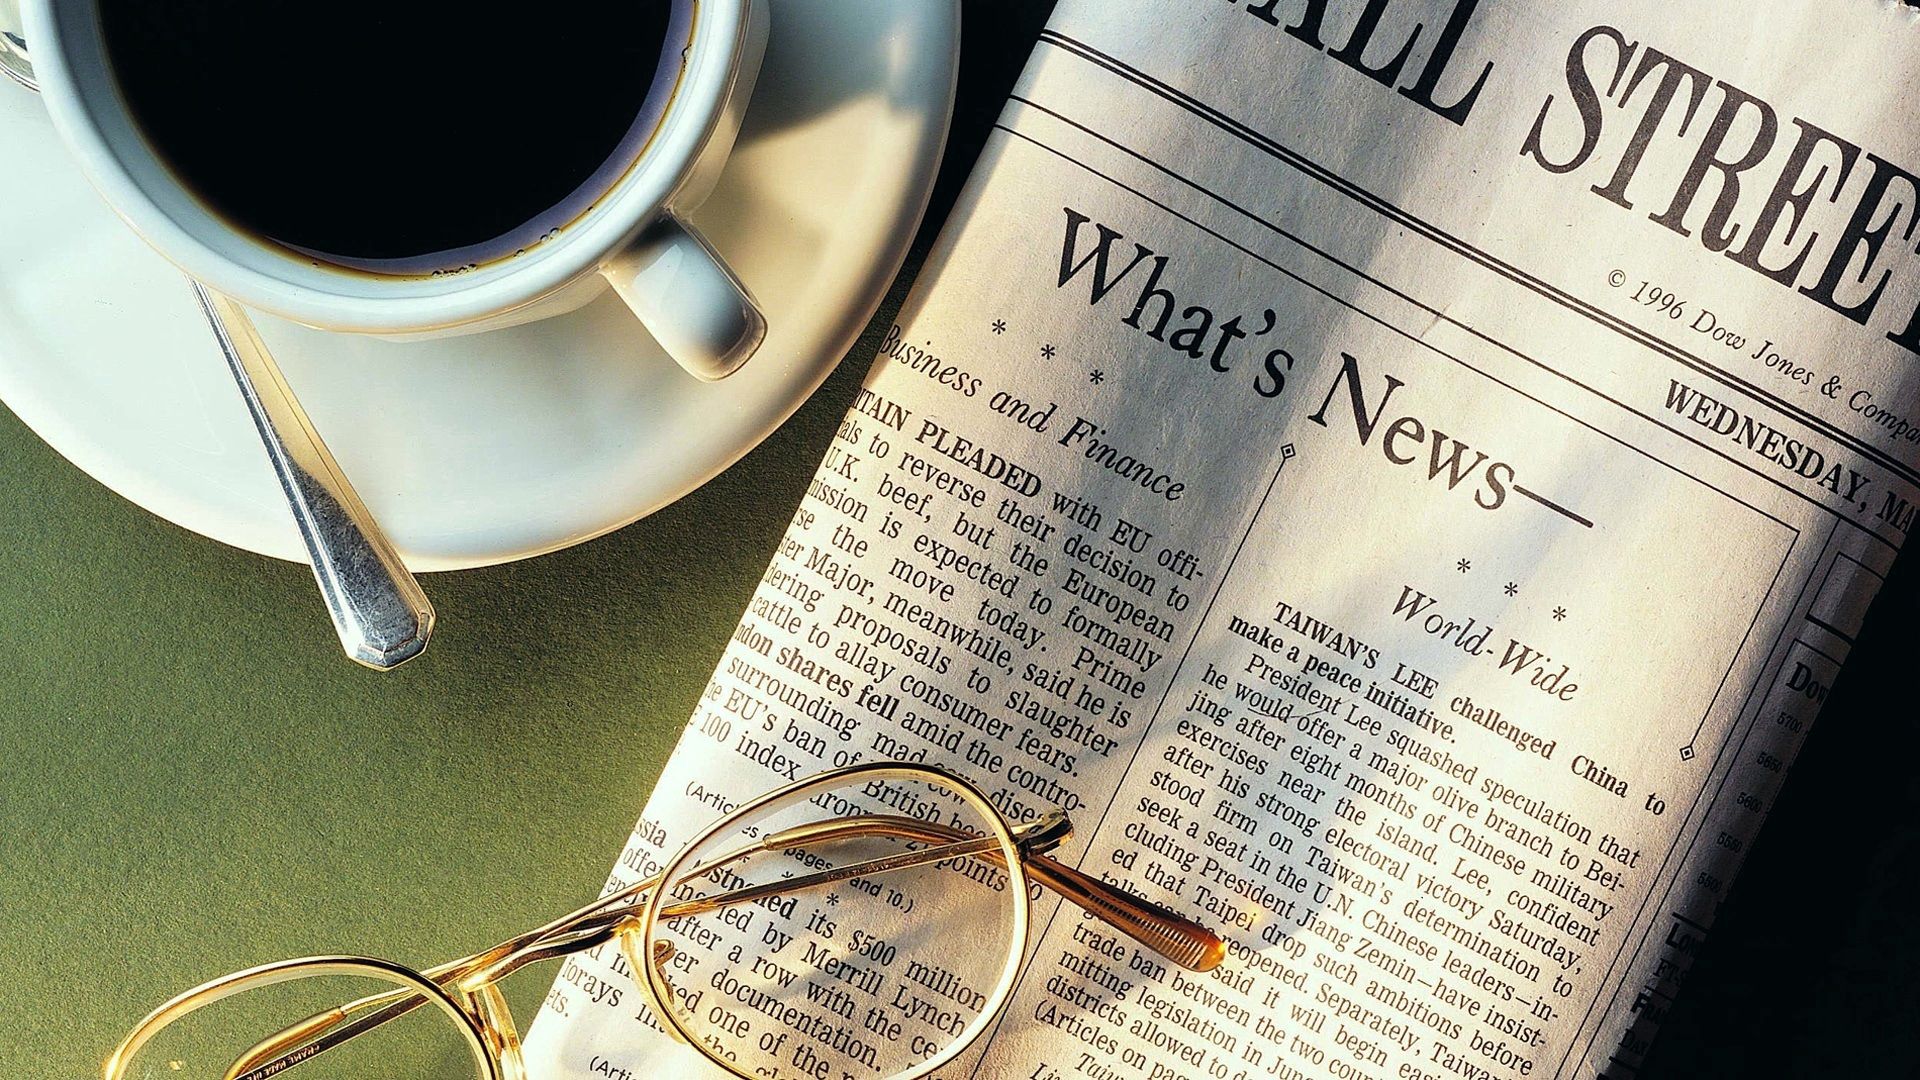 Cool Wallpapers coffee, food, cup, glasses, spectacles, newspaper, spoon, news, cup holder